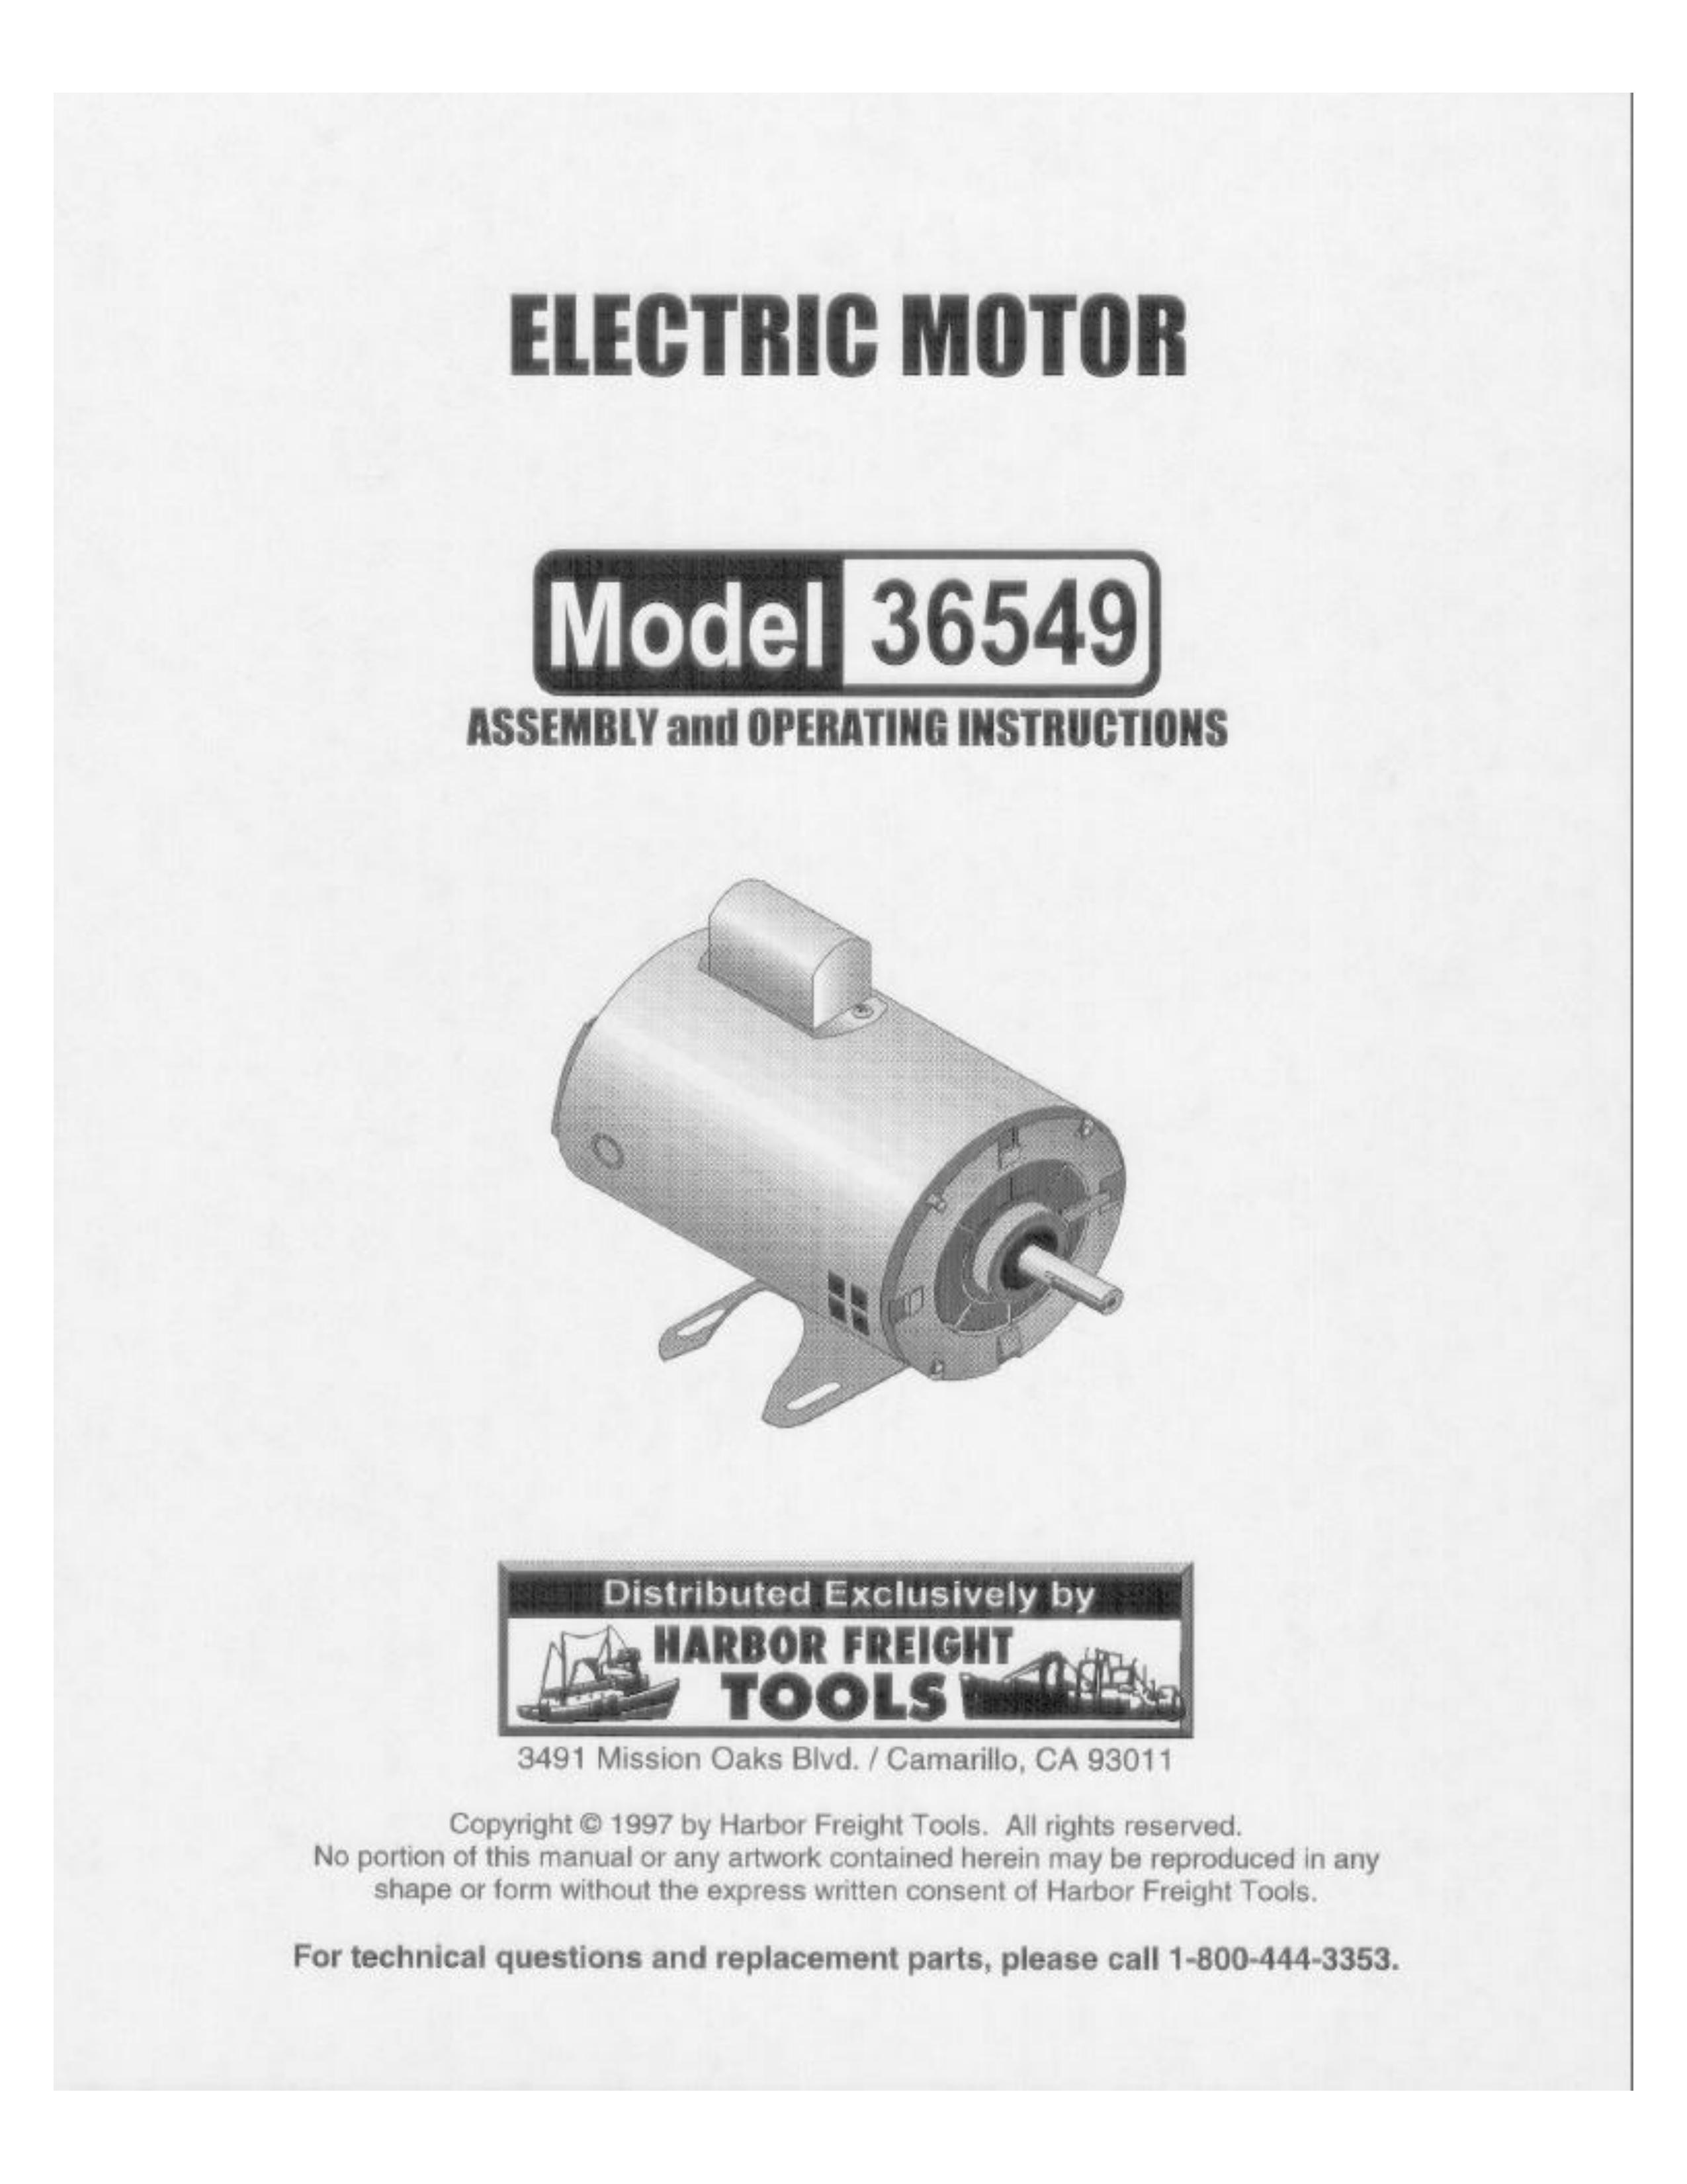 Harbor Freight Tools 36549 Outboard Motor User Manual